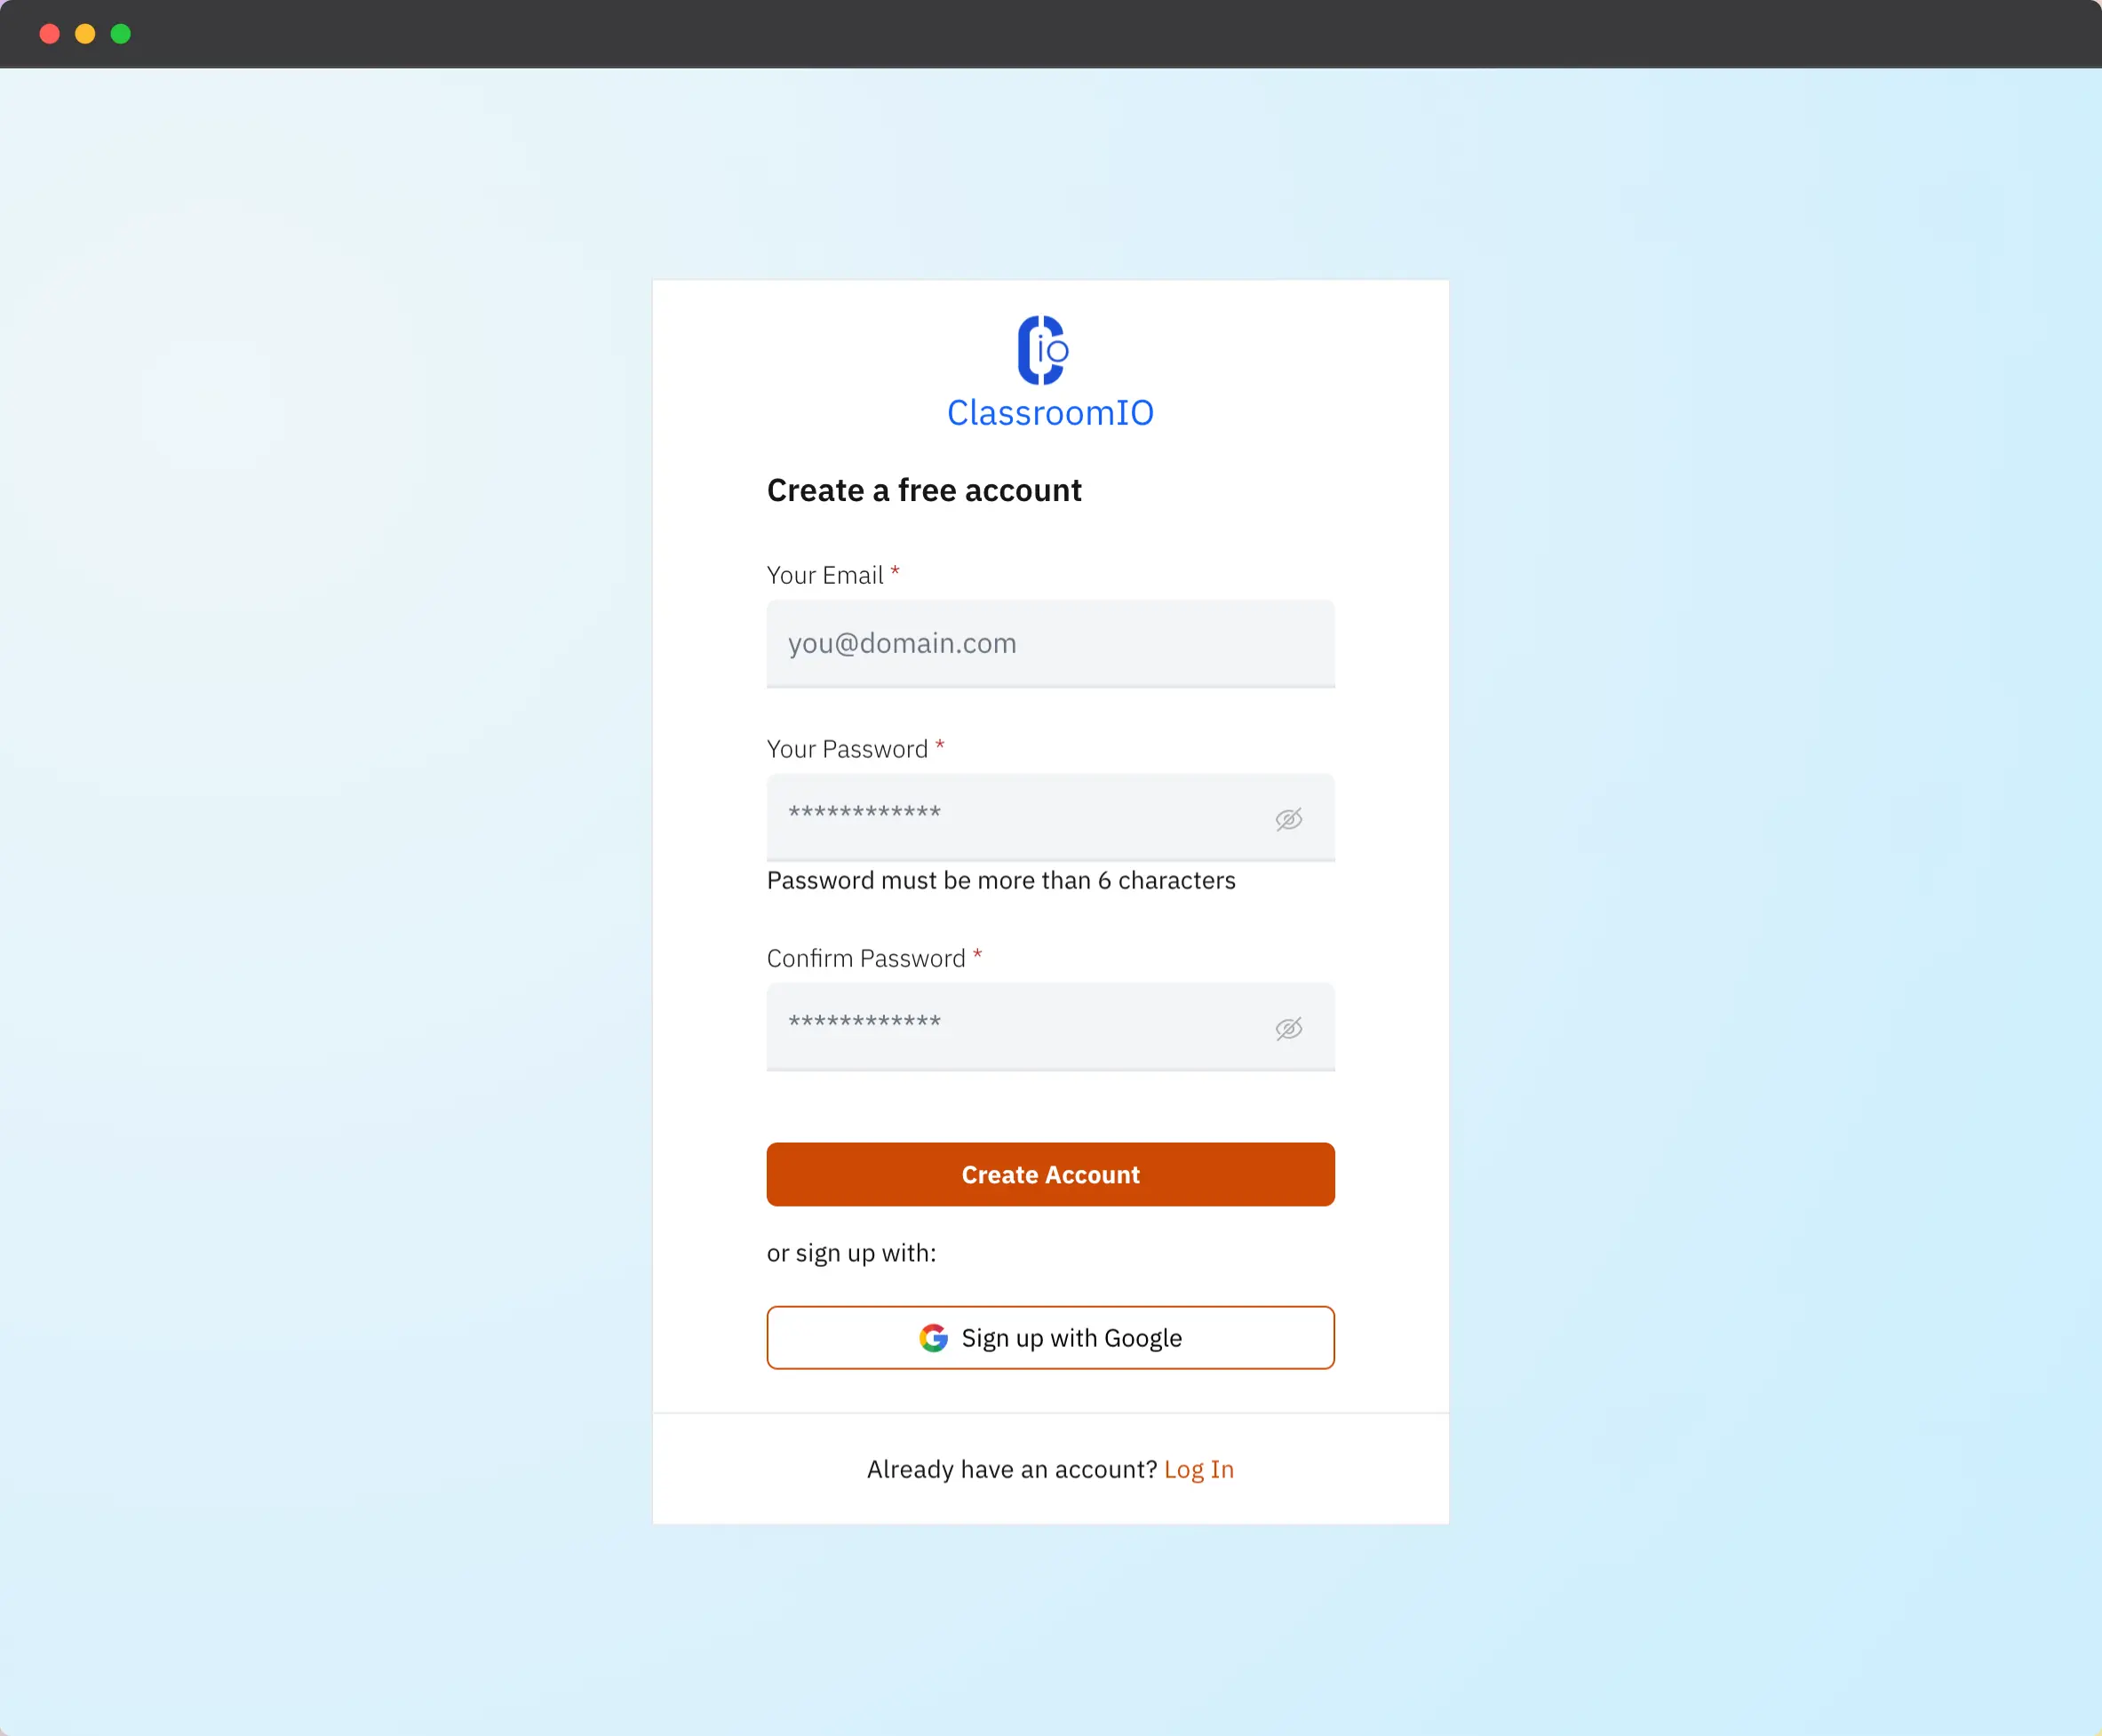 ClassroomIO sign-up page with a sign-up form containing inputs for Your Name, Your Password, and, Confirm Password. At the bottom, there is a Create Account button, a Sign up with Google button, and, a link to log in if you already have an account.